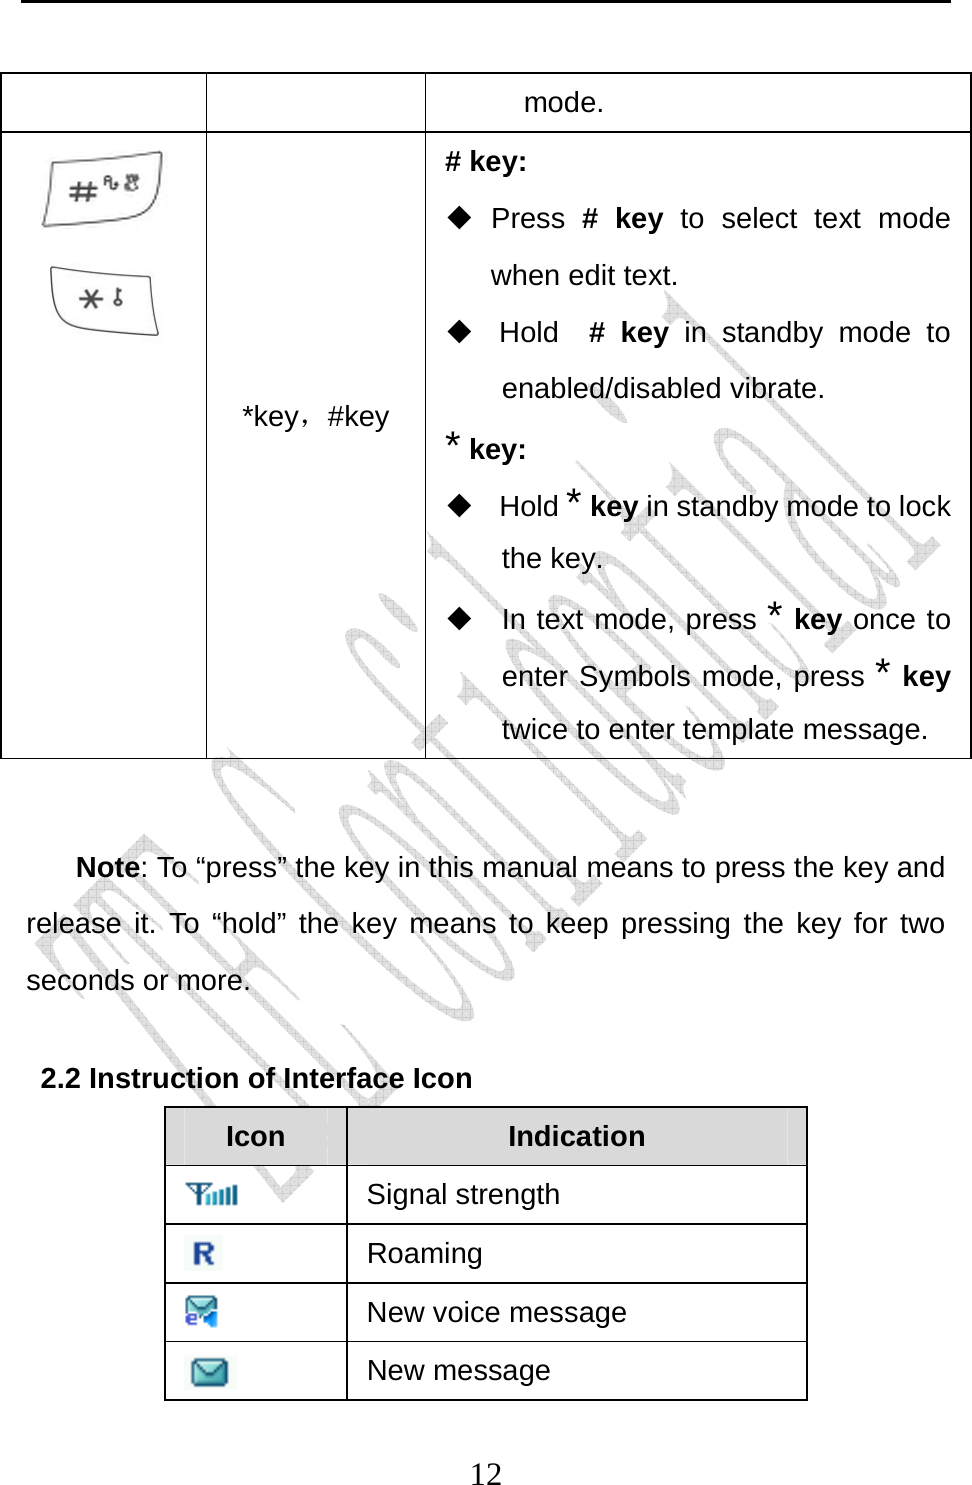                              12mode.     *key，#key  # key:  Press # key to select text mode when edit text.  Hold  # key in standby mode to enabled/disabled vibrate. * key:  Hold * key in standby mode to lock the key.   In text mode, press * key once to enter Symbols mode, press * key twice to enter template message.   Note: To “press” the key in this manual means to press the key and release it. To “hold” the key means to keep pressing the key for two seconds or more. 2.2 Instruction of Interface Icon Icon  Indication    Signal strength    Roaming     New voice message  New message   